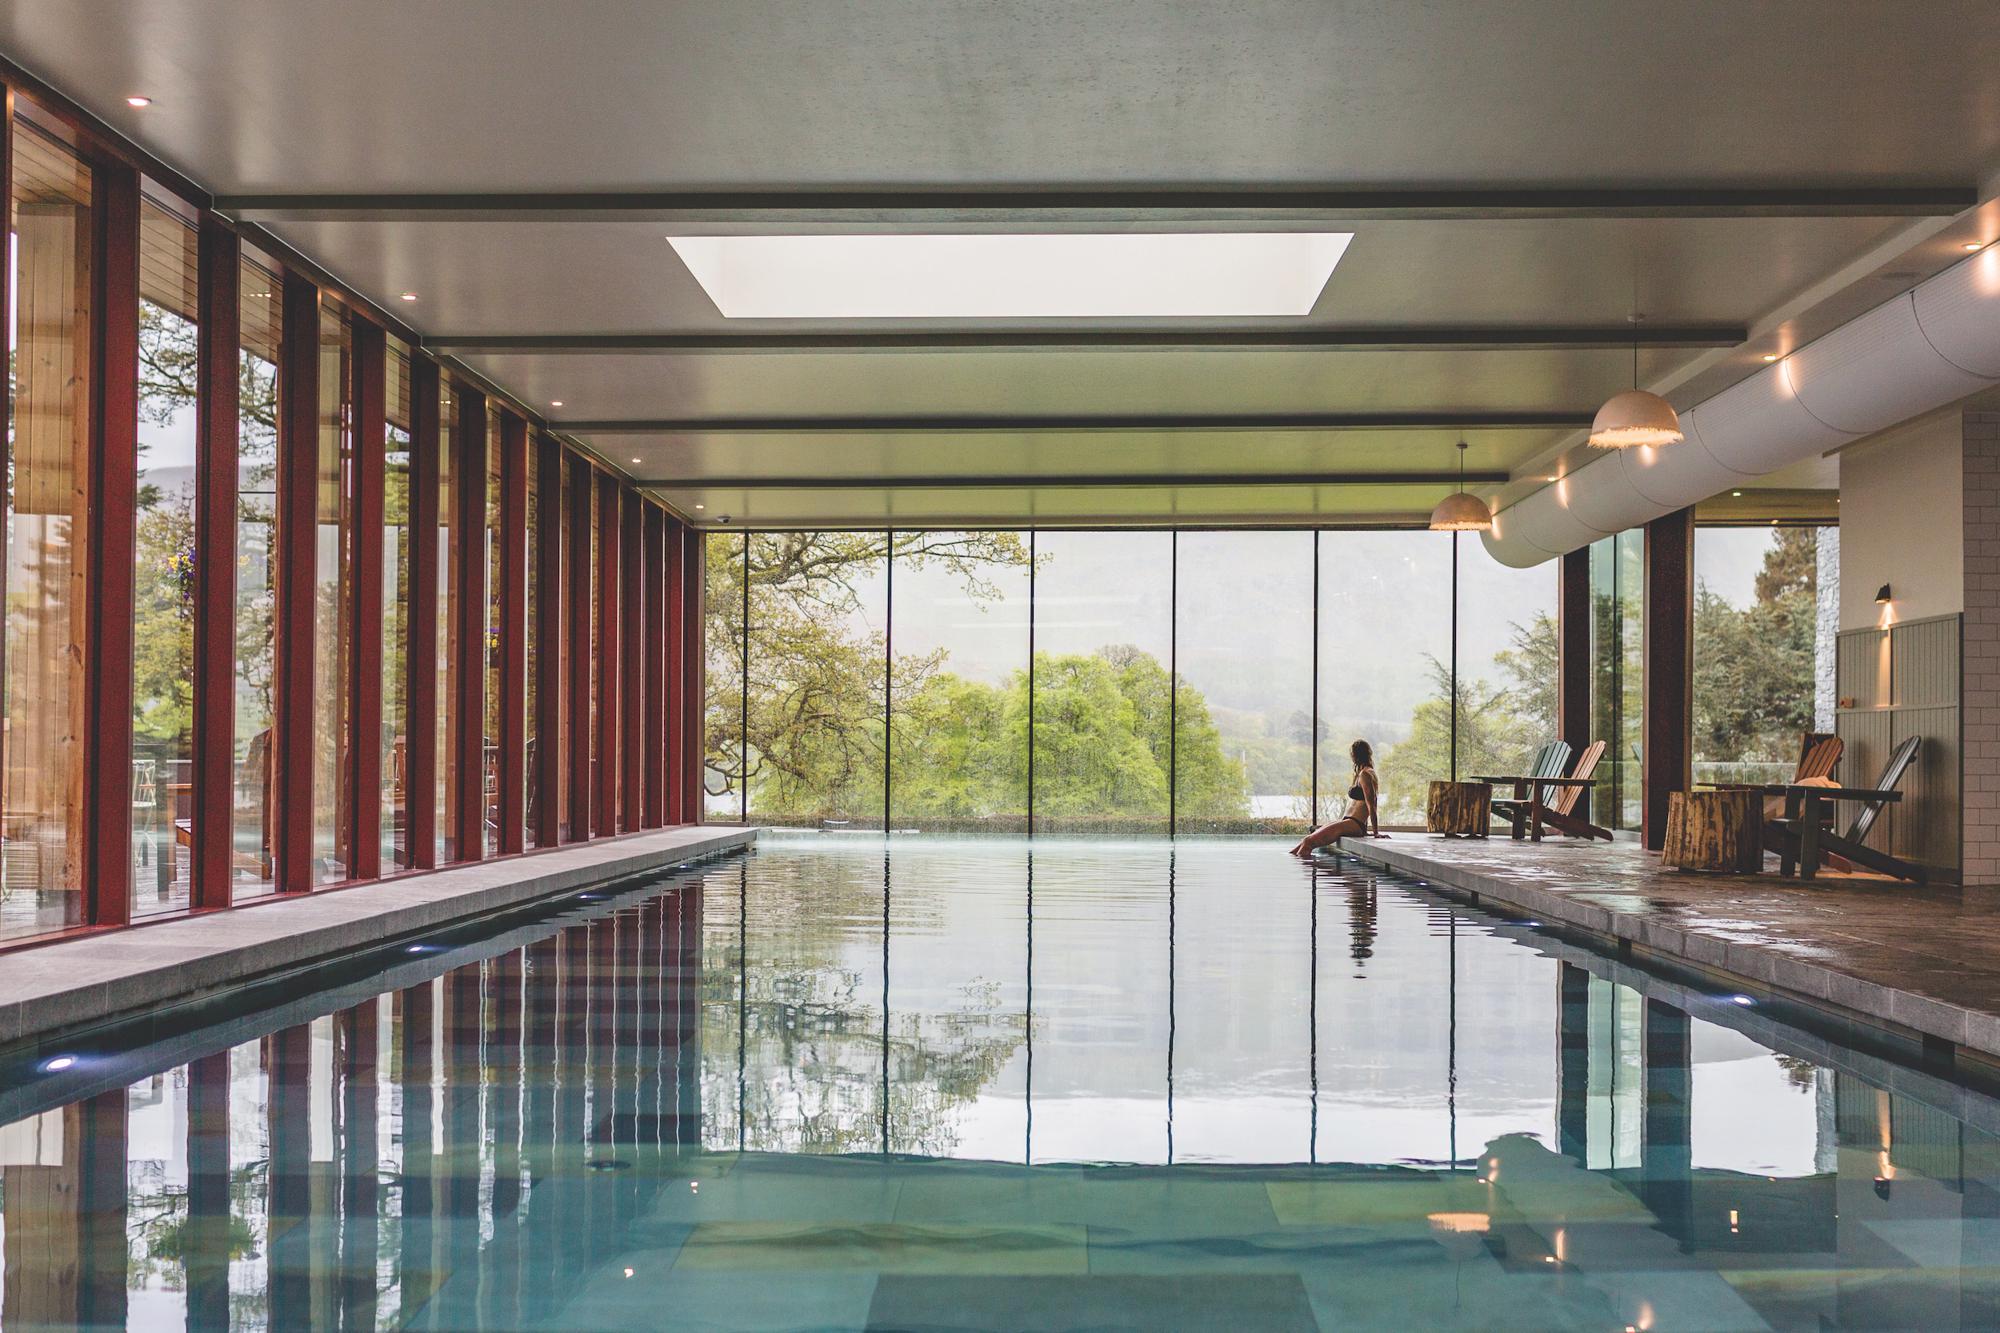 Spa hotels - best UK hotels with spas, pools & treatments - Cool Places to Stay in the UK